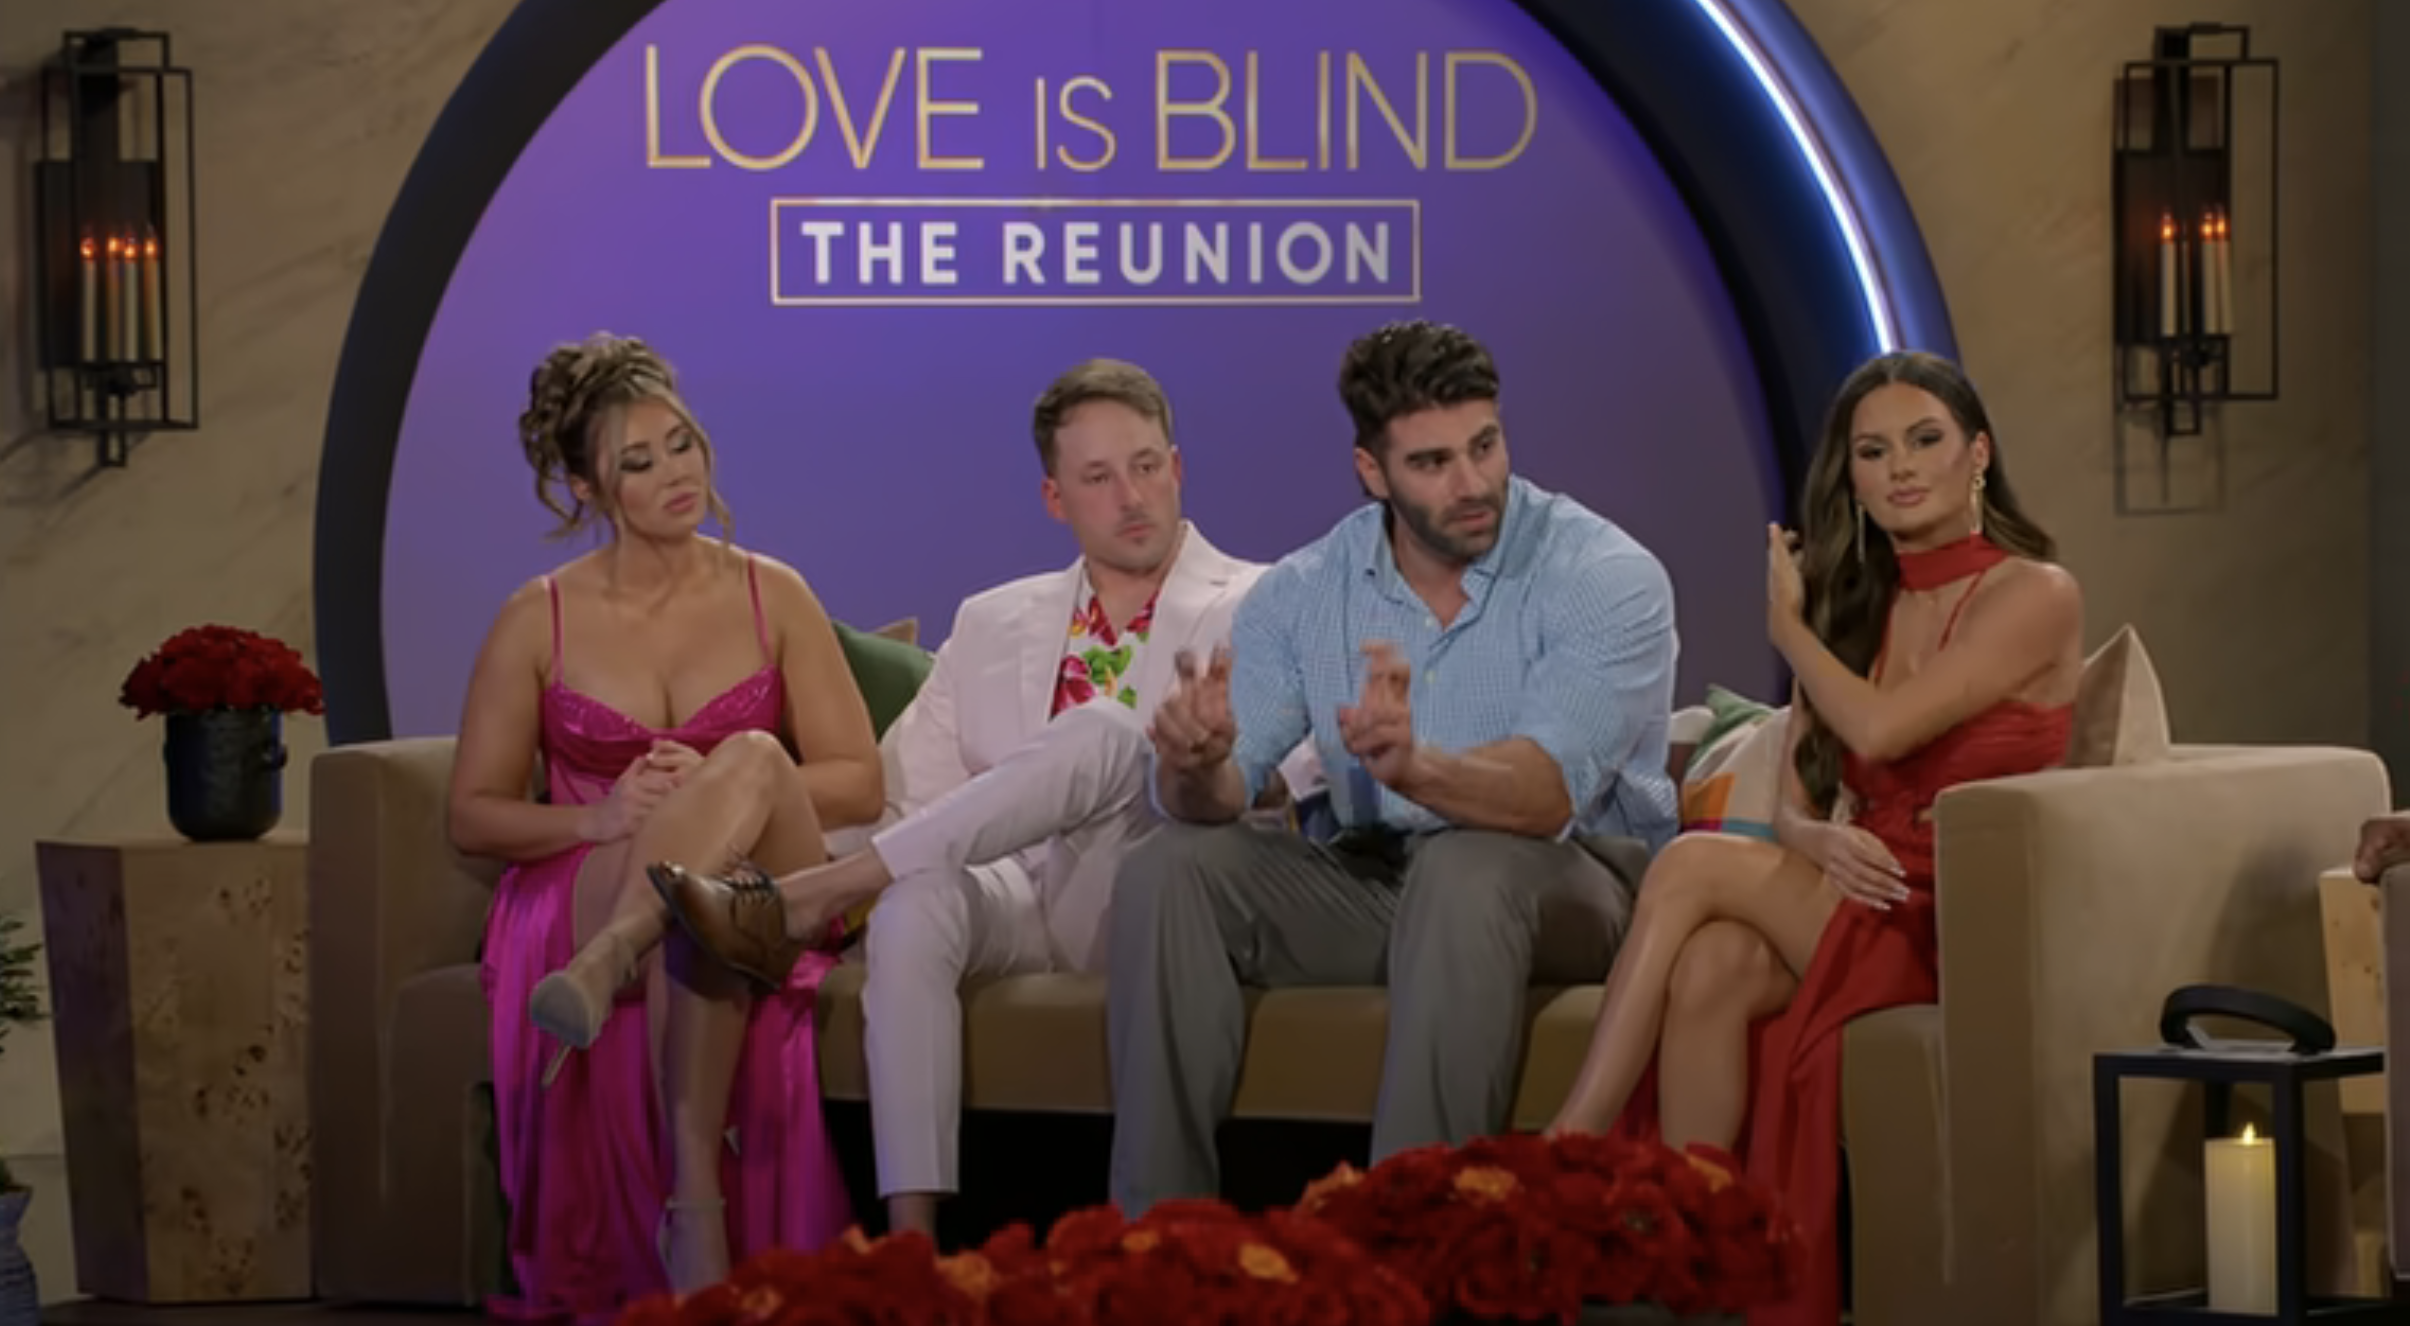 Sarah Ann, Jeramy, Trevor, and Jessica on a &#x27;Love is Blind, the Reunion&#x27; set with flowers, speaking into microphones